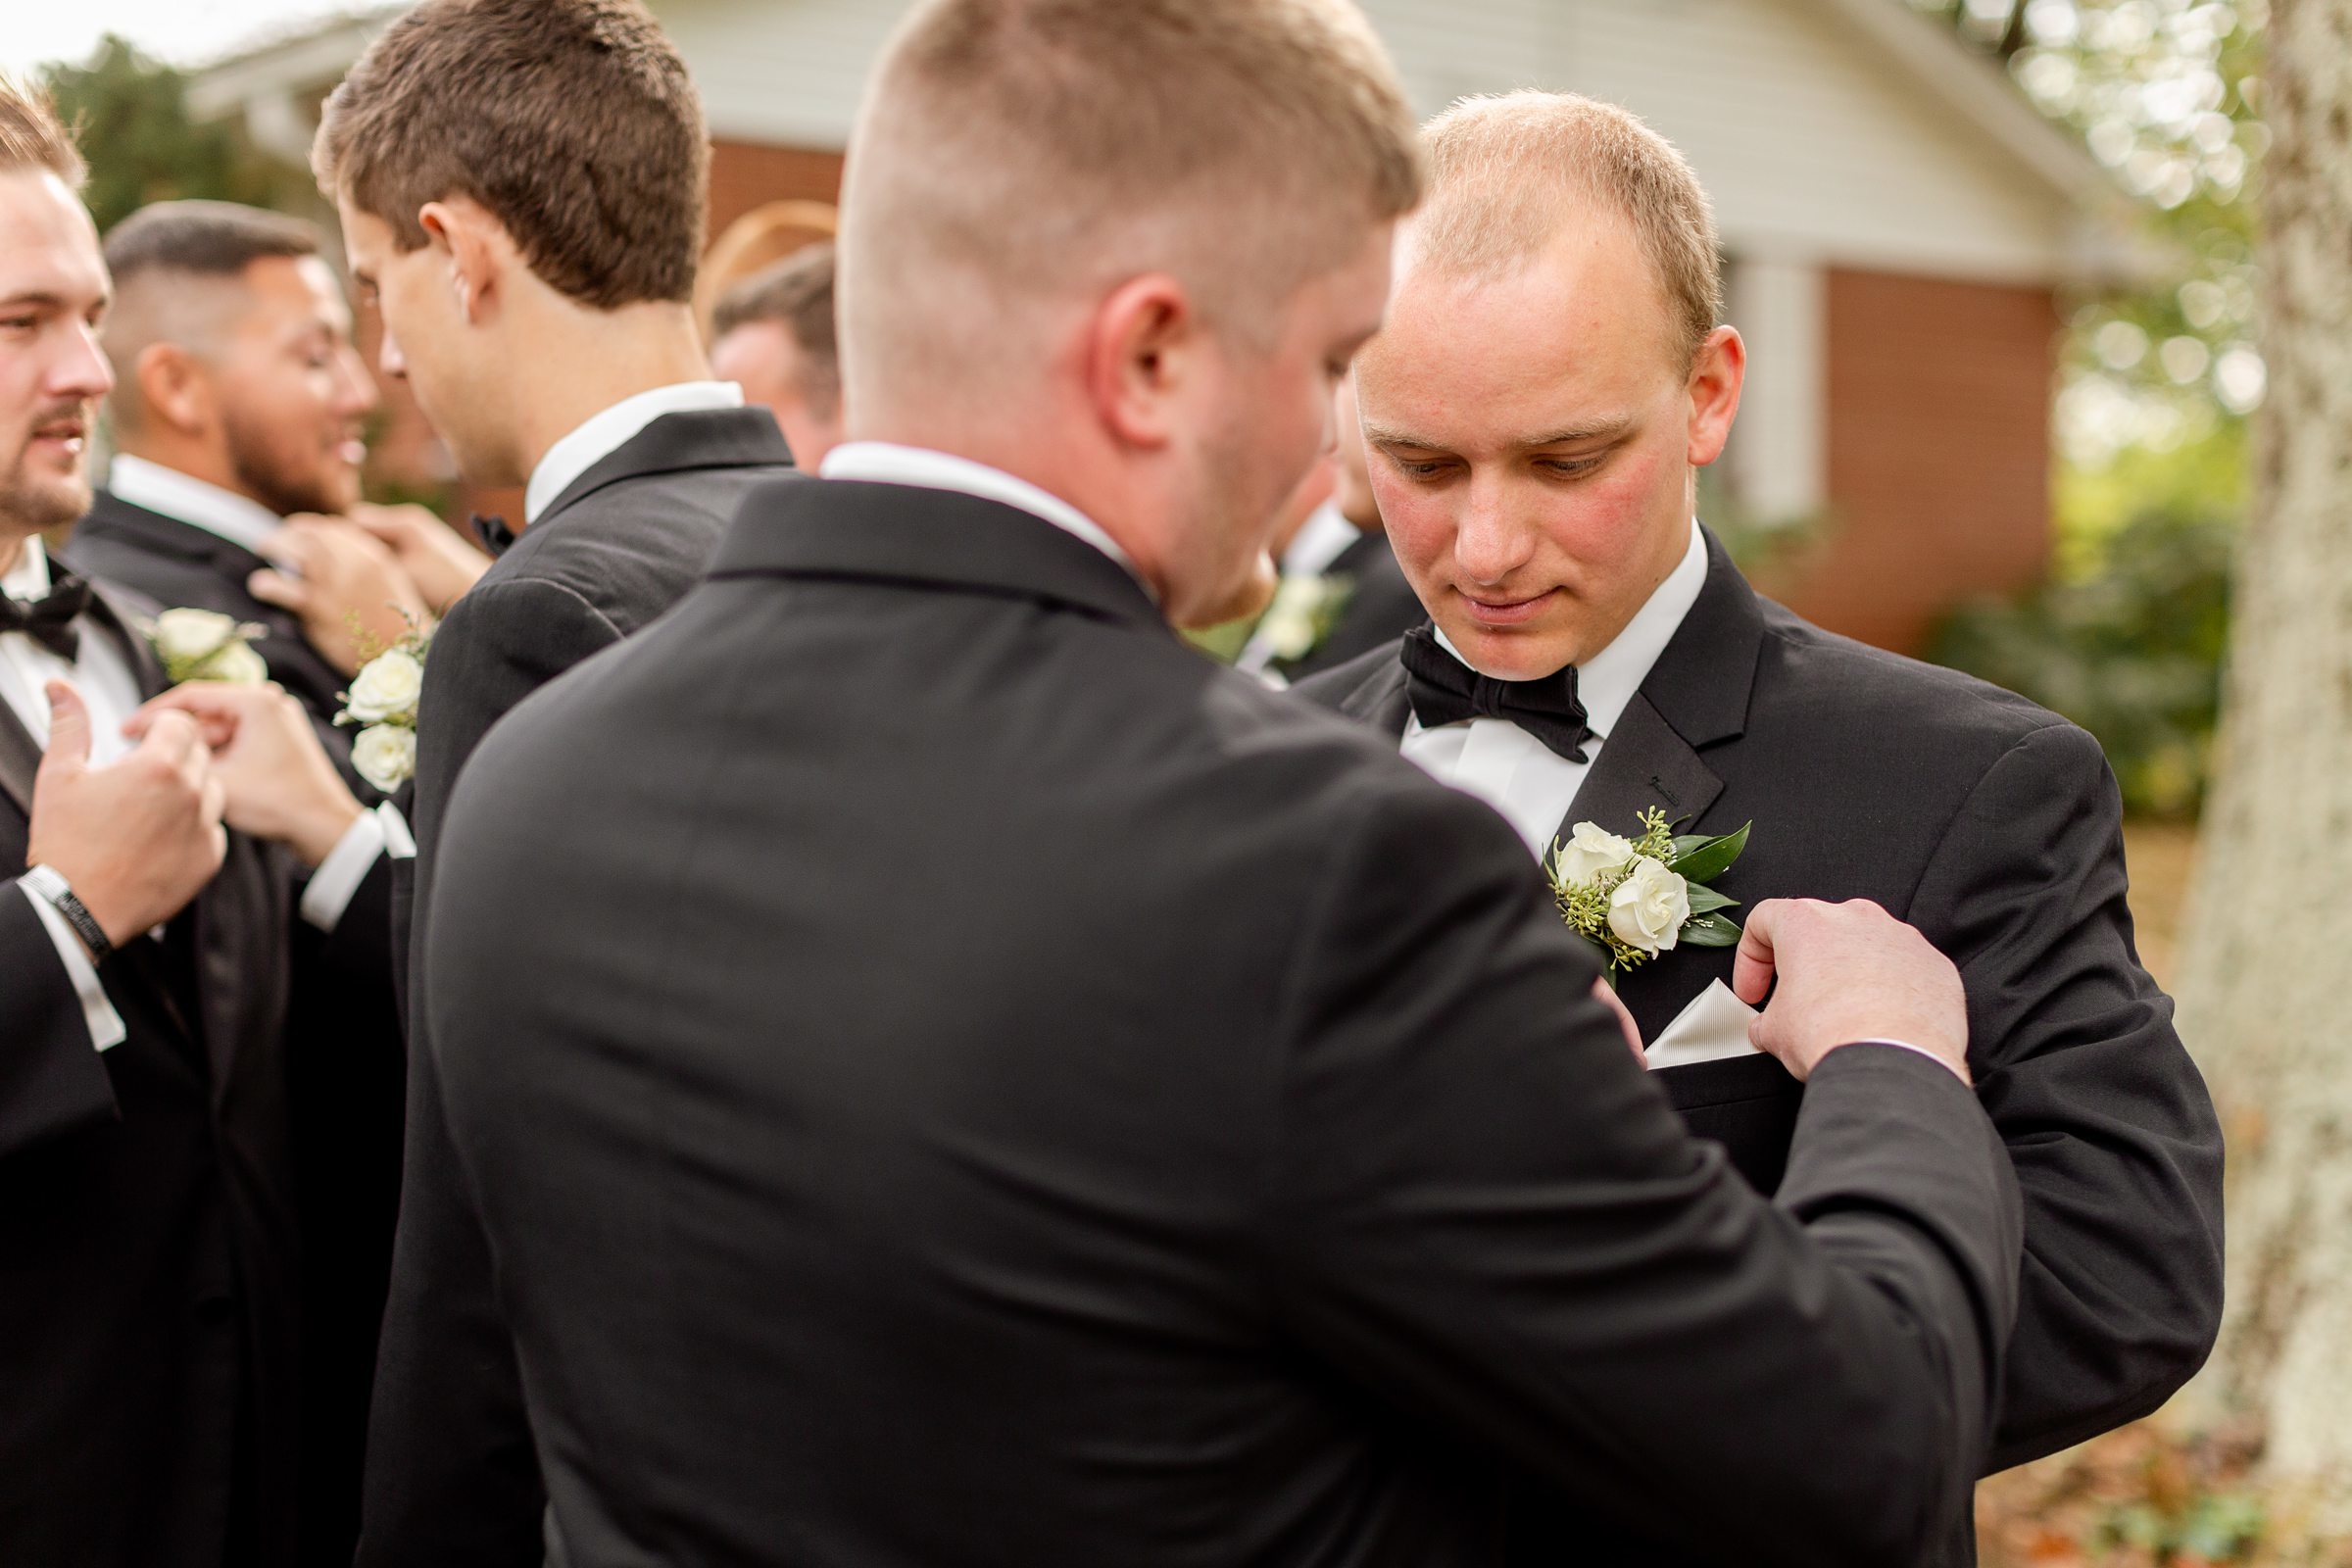 Hannah and Cody's Wedding in Booneville, IN046.jpg